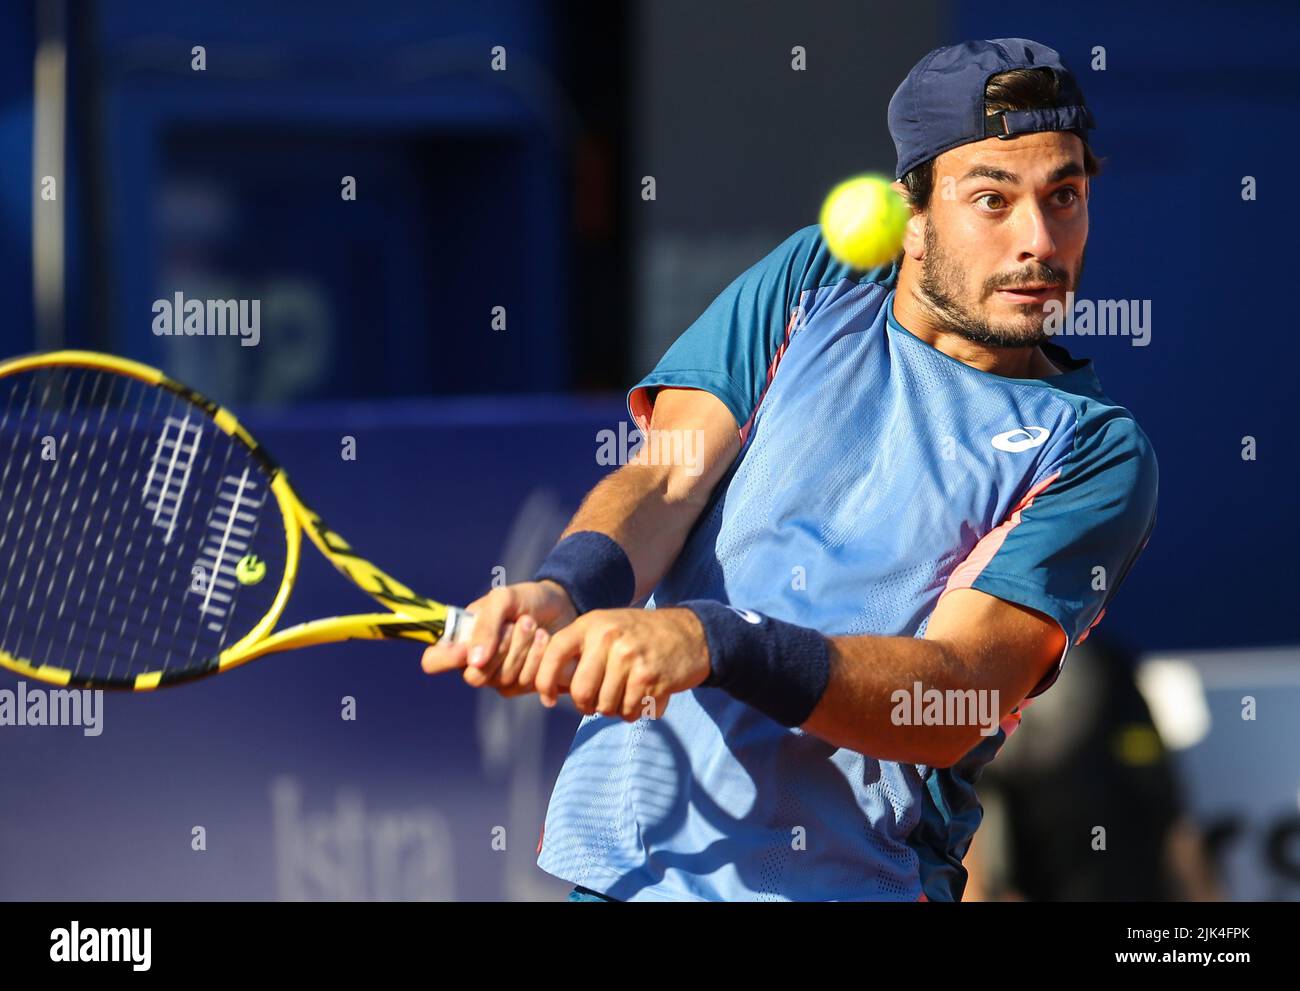 UMAG, CROATIA - JULY 30: Giulio Zeppieri of Italy play against Carlos  Alcaraz of Spain during Men's Single semifinal match on Day 7 of the 2022  Croatia Open Umag at Goran Ivanisevic